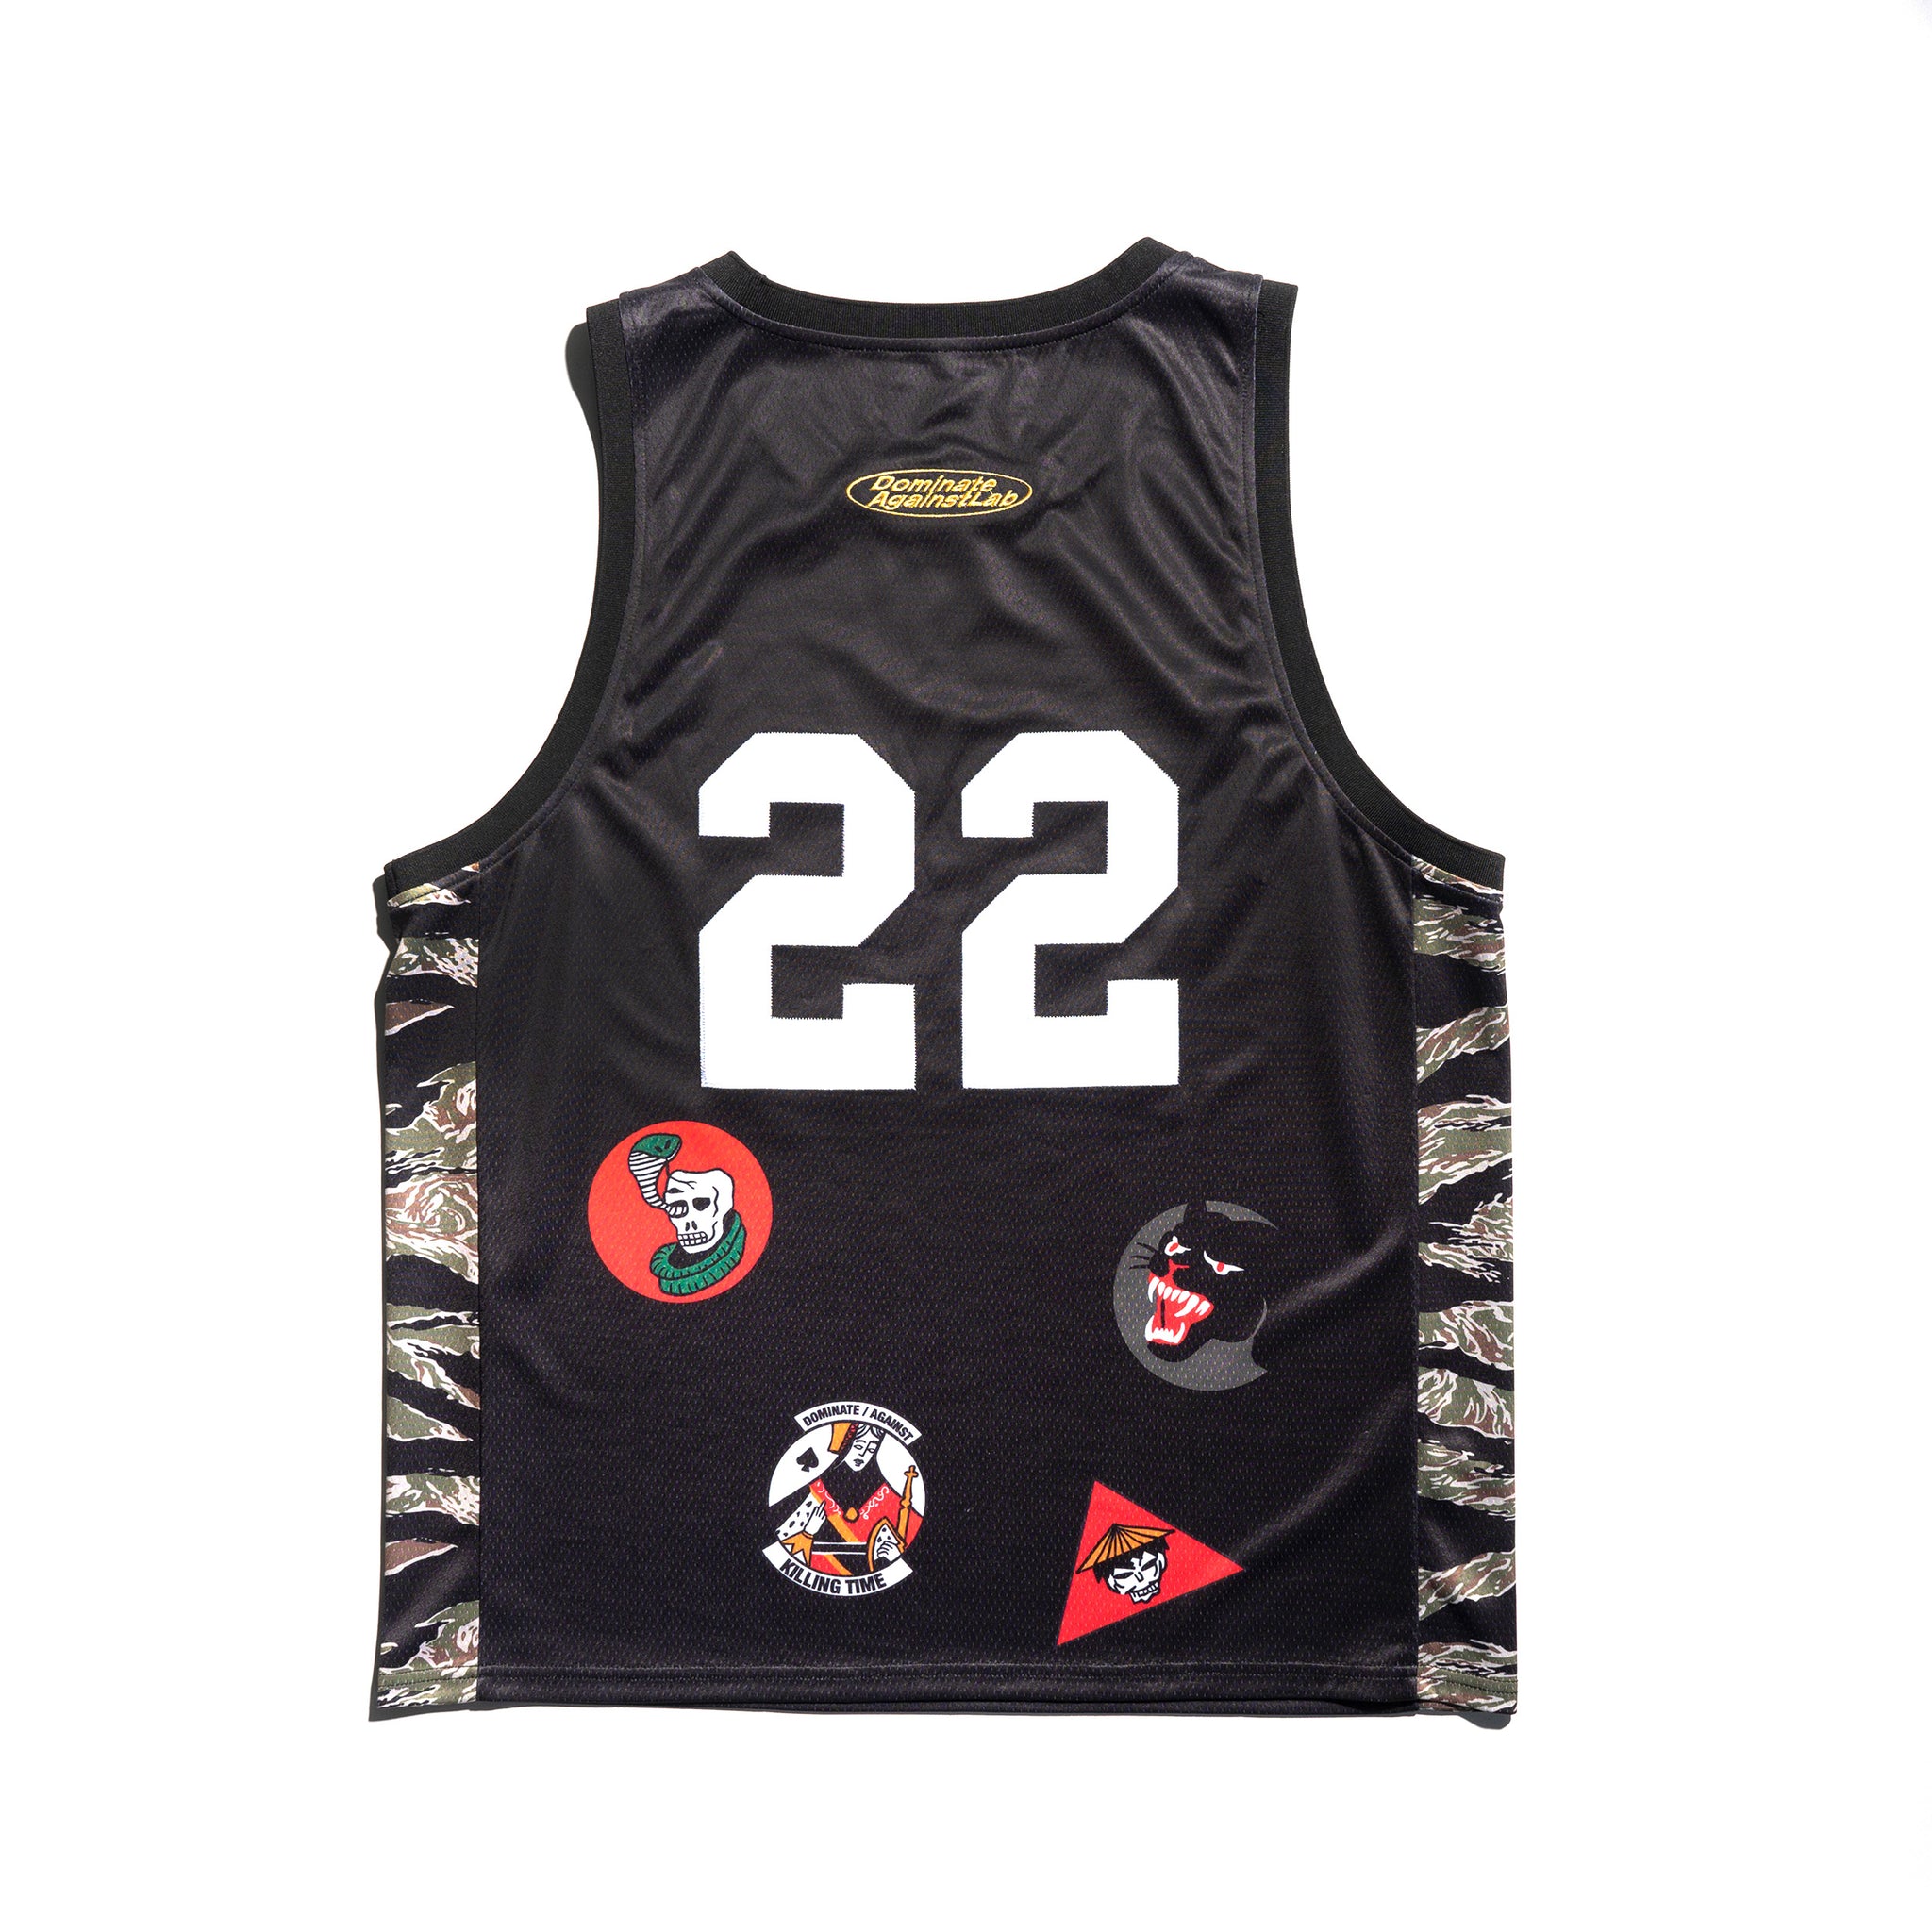 AGAINST X DOMINATE PATCH MESH JERSEY